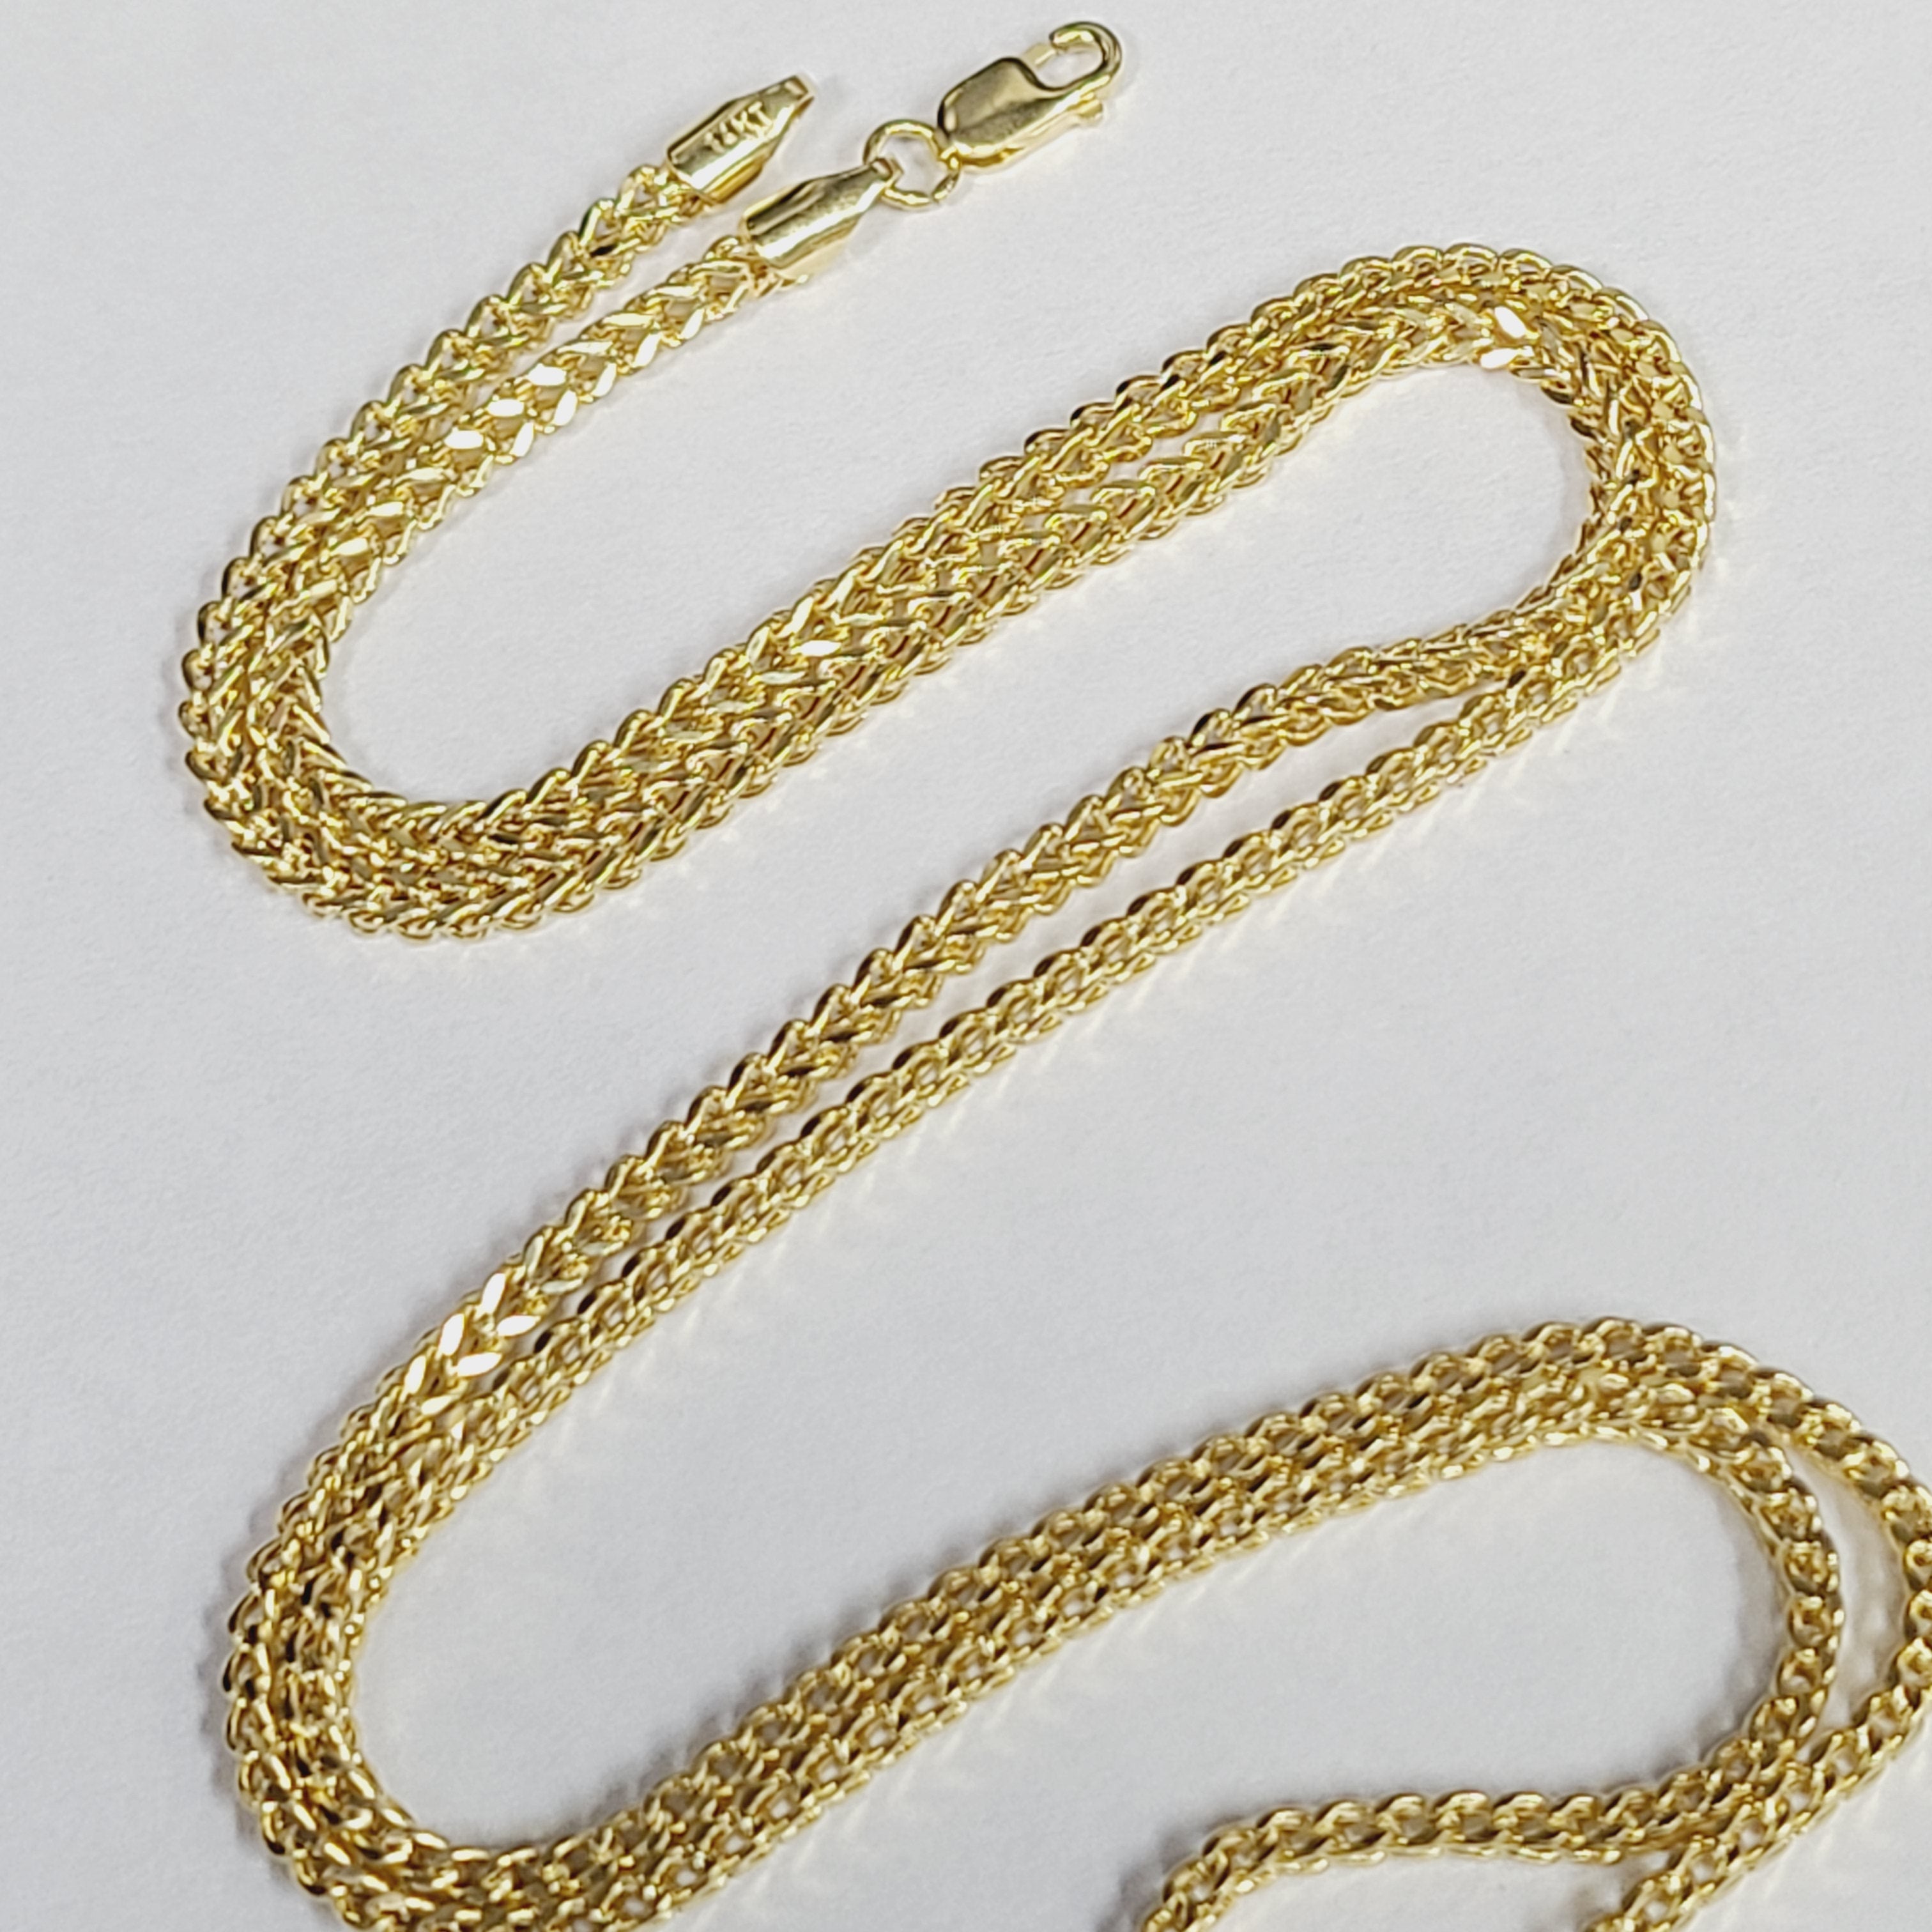 New! 14K Yellow Gold Franco Chain 2.10mm wide Chain Necklace 20" 5.18g